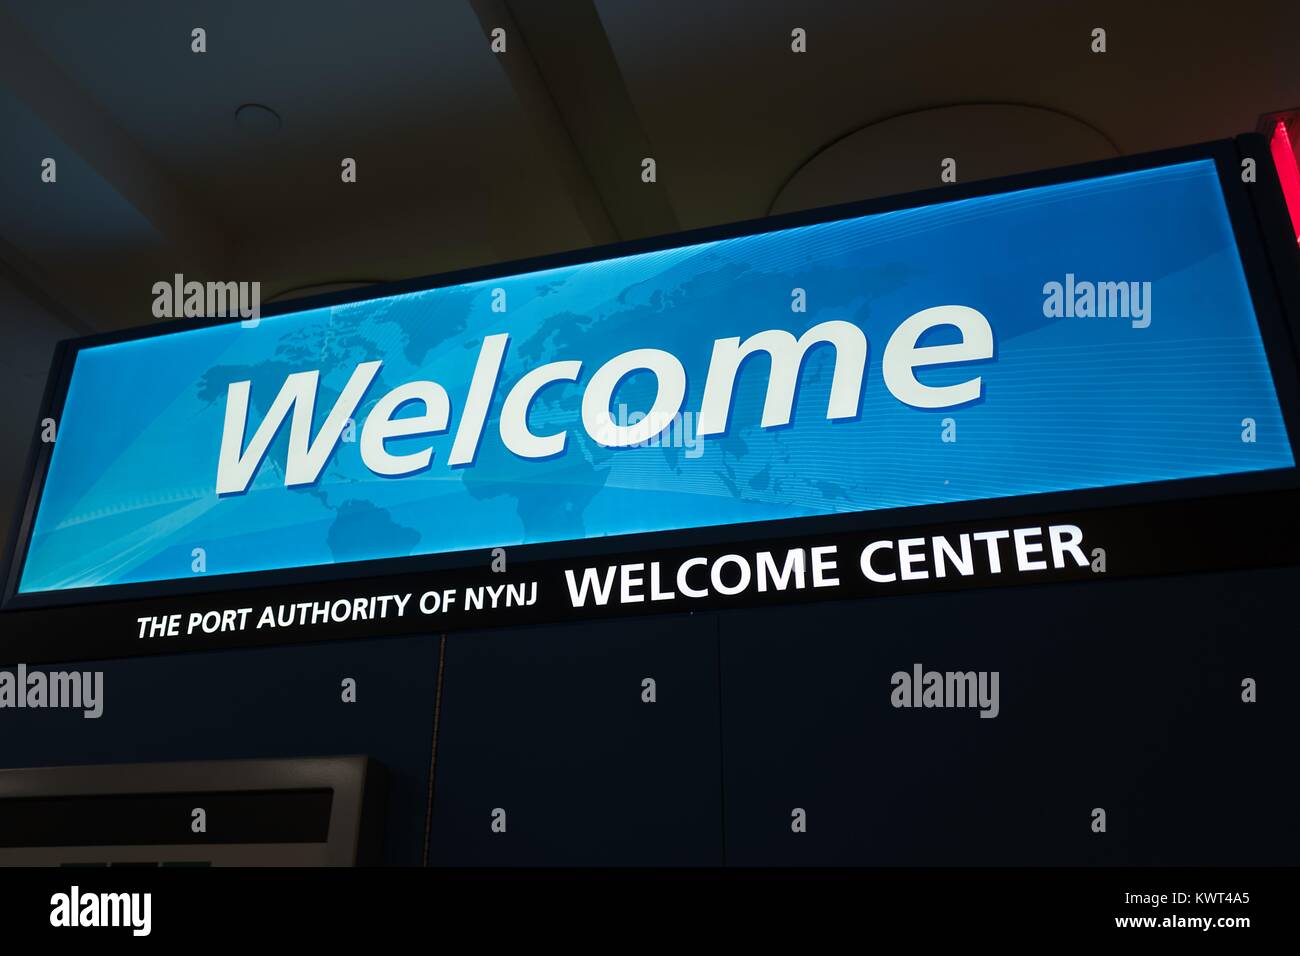 Signage for the Port Authority of New York and New Jersey's Welcome Center at John F Kennedy International Airport (JFK) in Queens, New York, September 13, 2017. Stock Photo